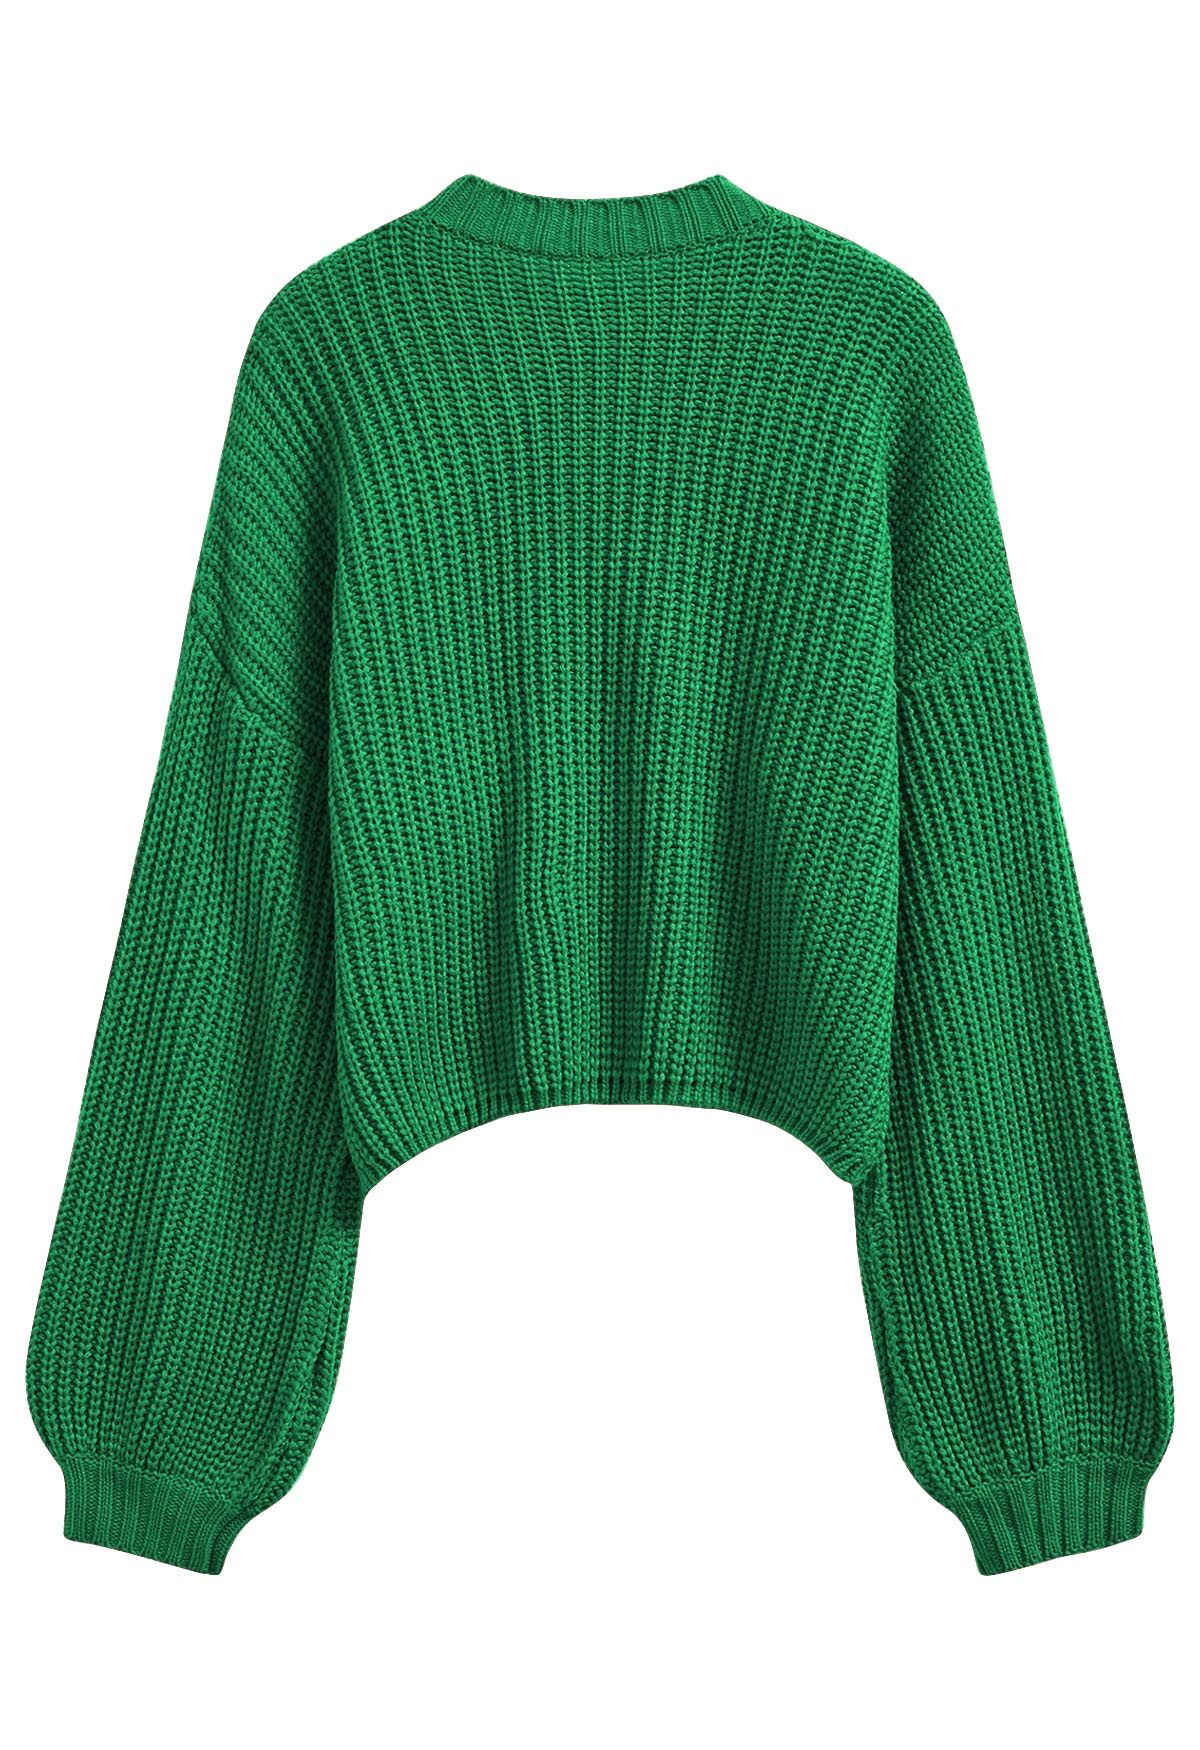 Gingerbread Man Patch Ribbed Sweater in Green - Retro, Indie and Unique ...